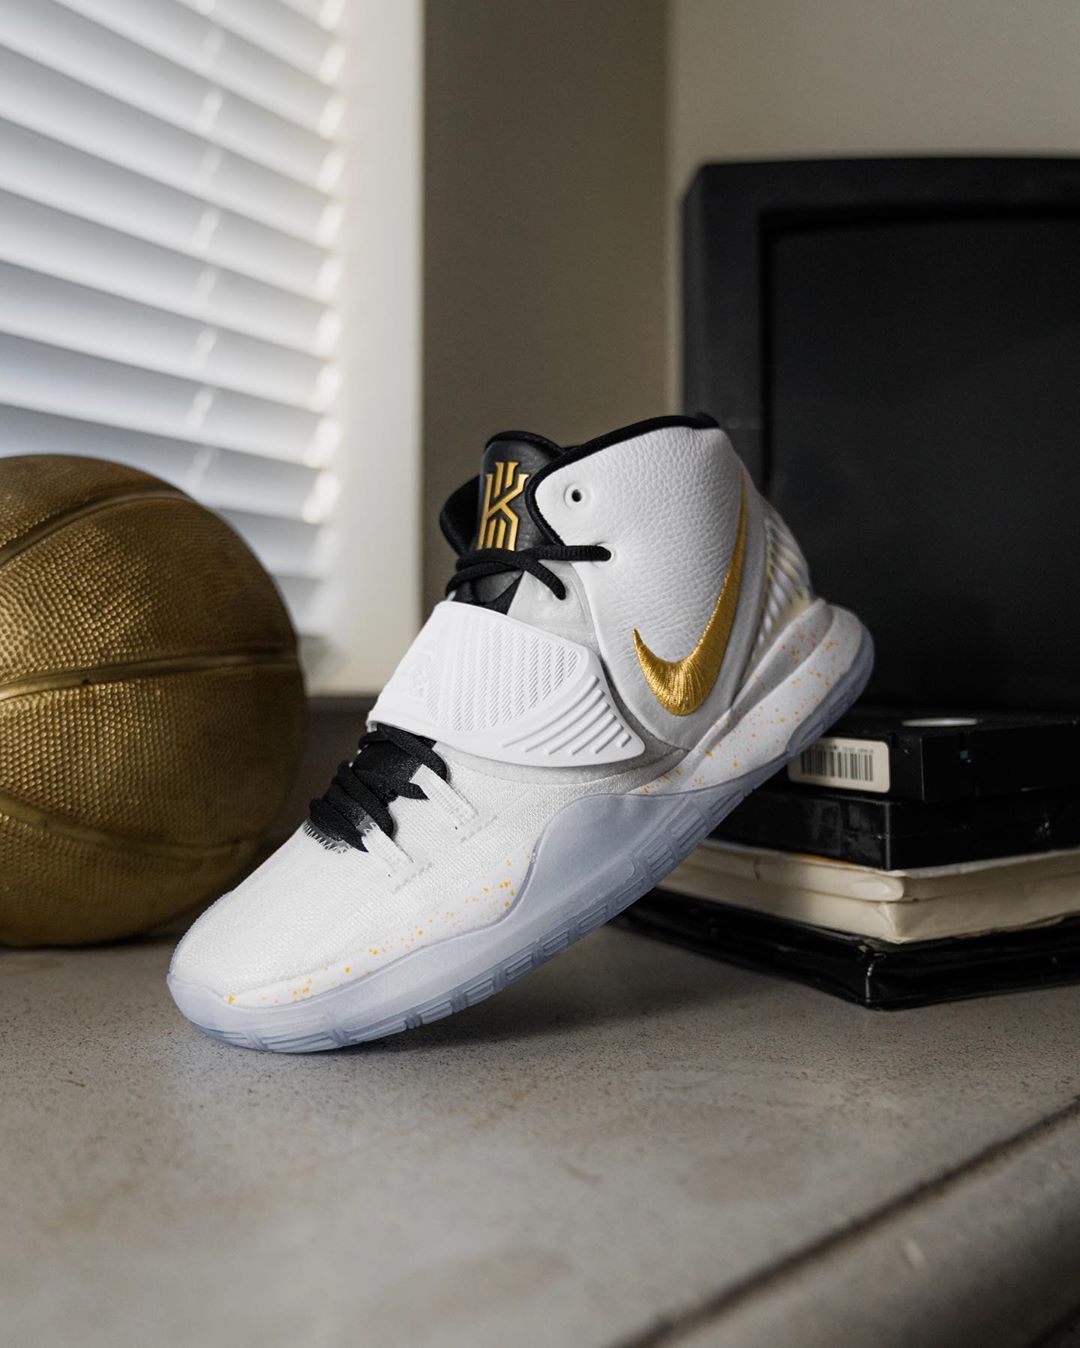 Nike By You iD Kyrie 6 White Ranger